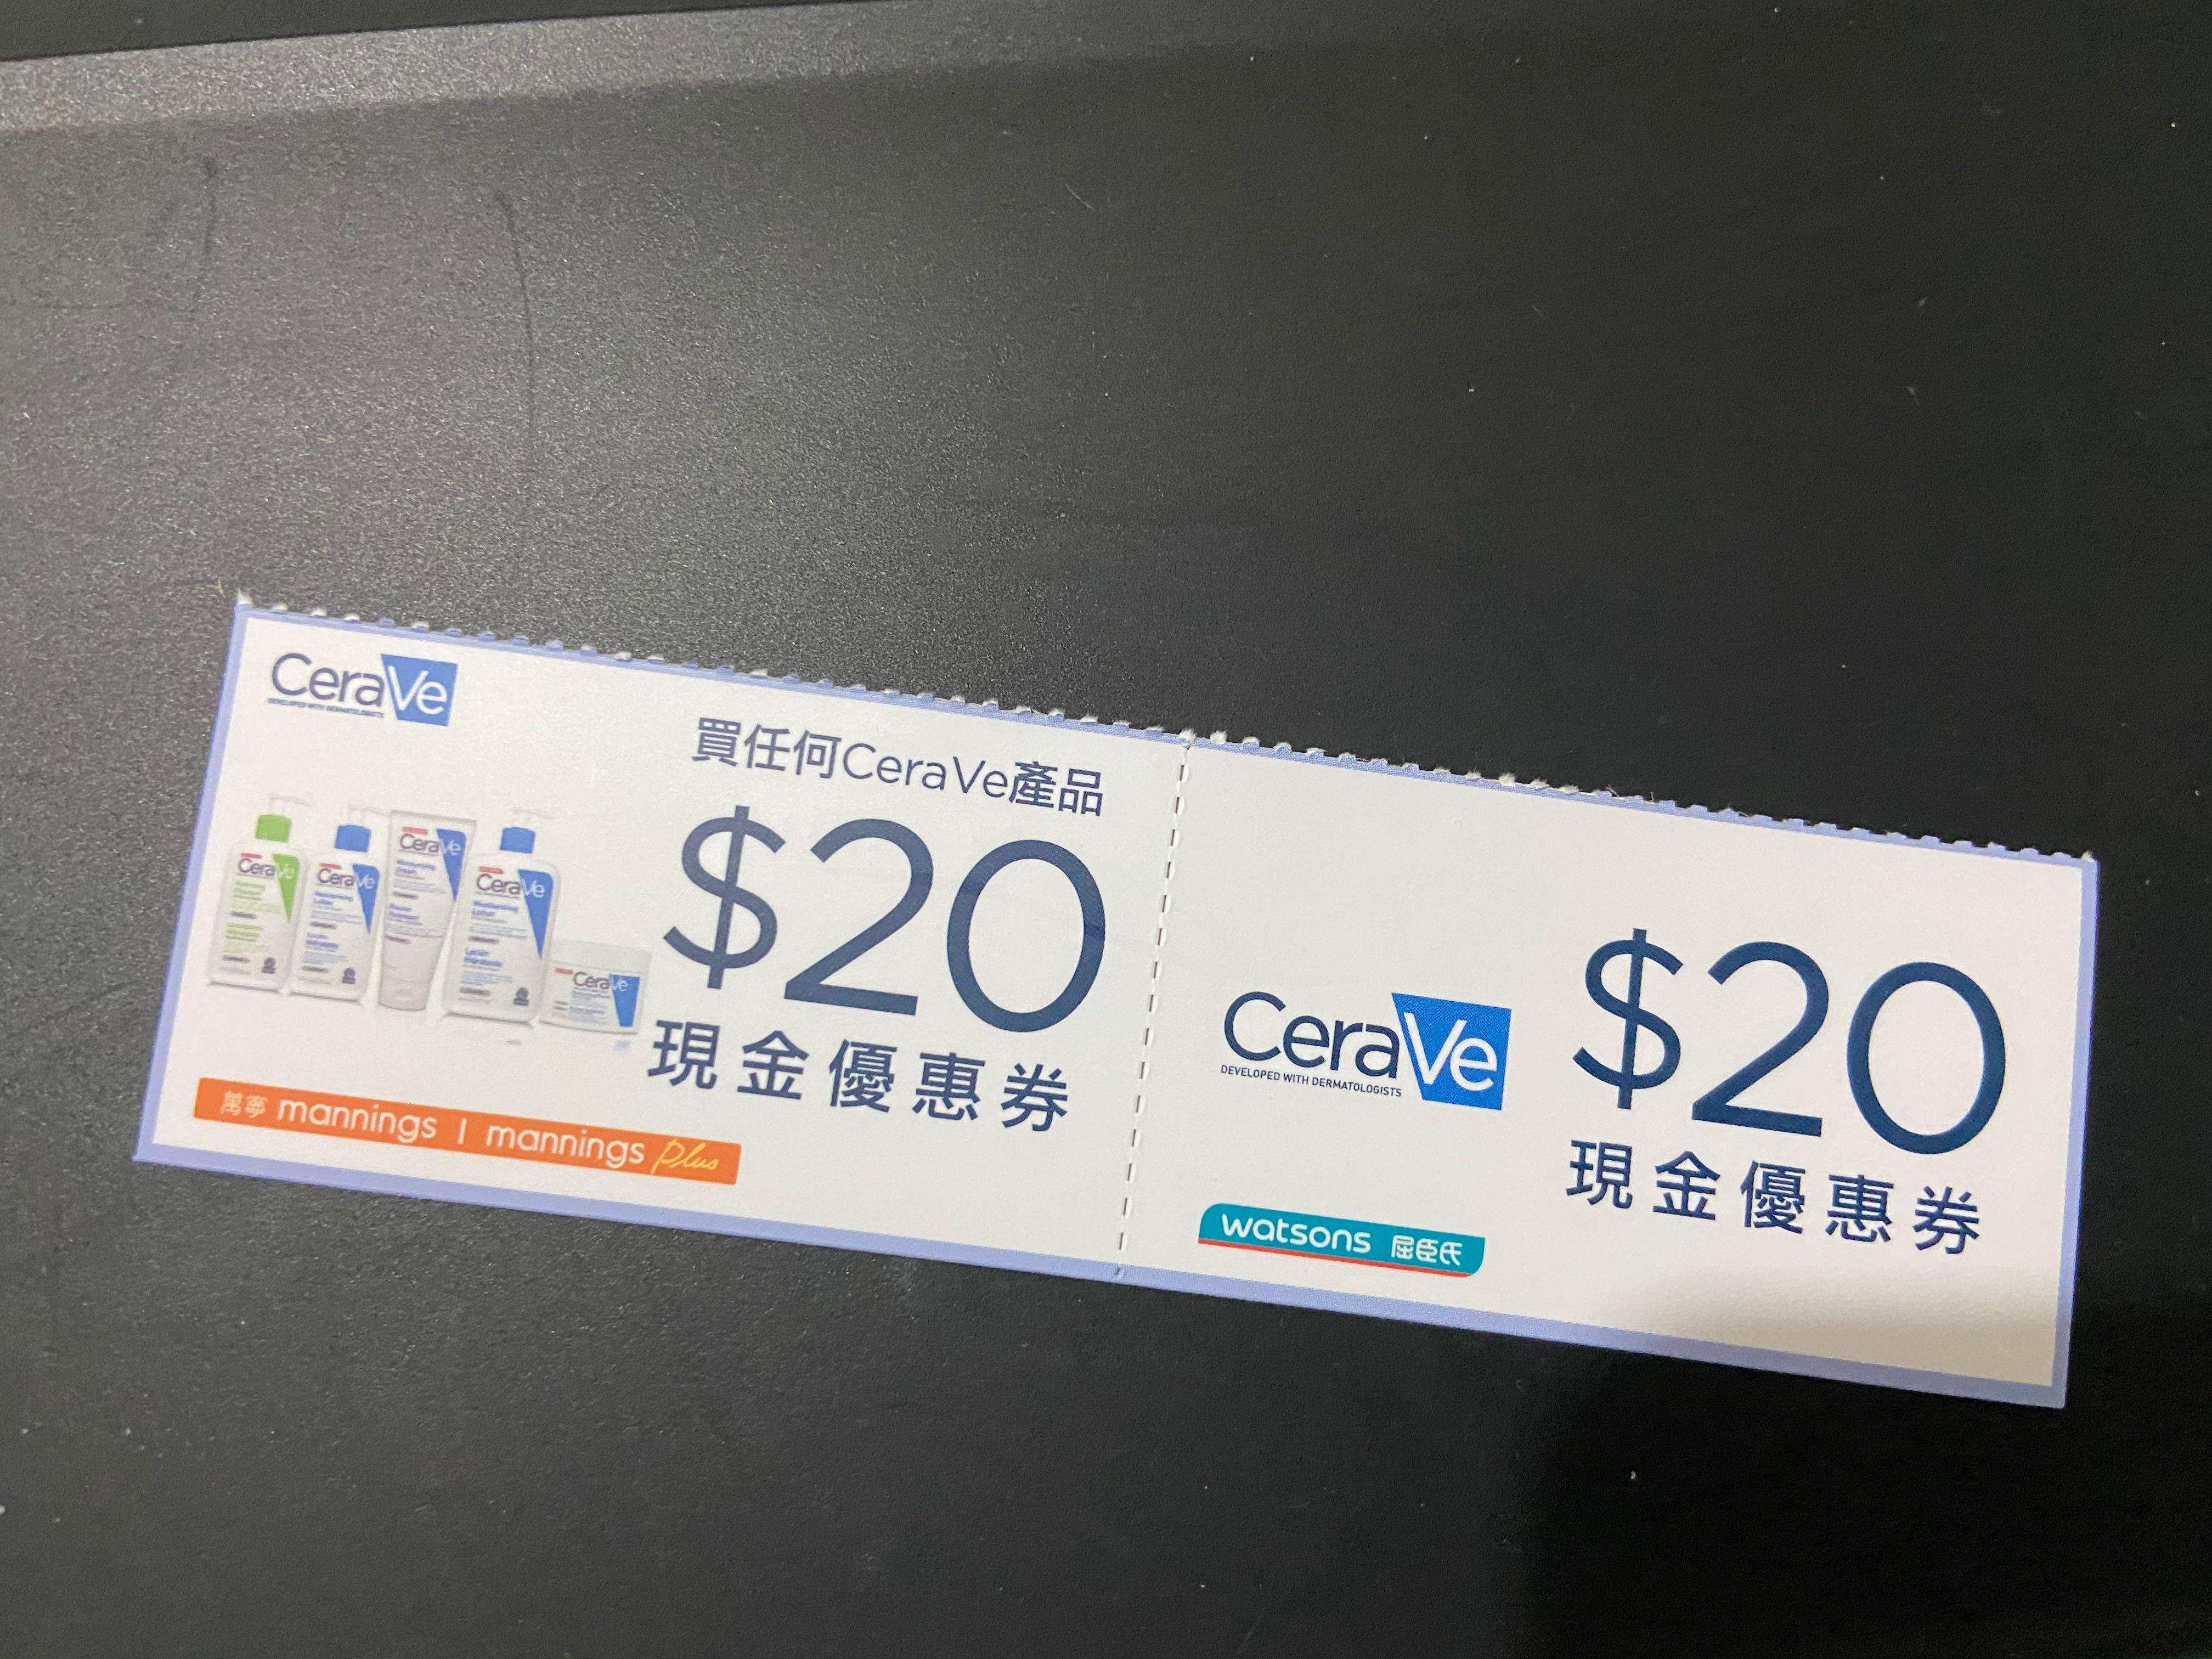 cerave-coupon-promo-code-voucher-carousell